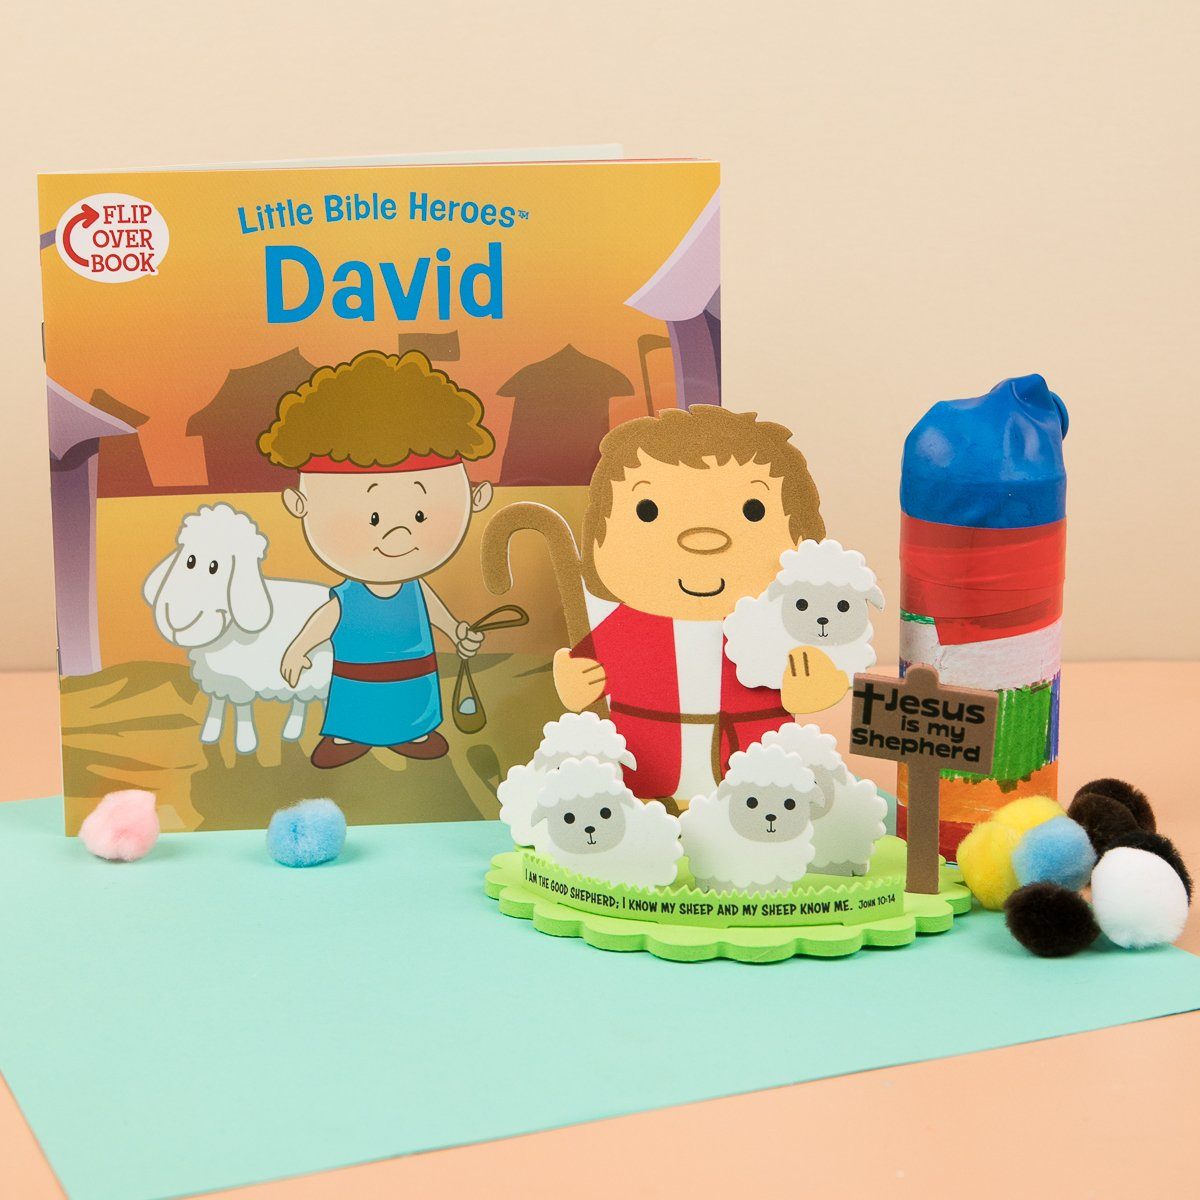 HelloBible Junior (ages 3-5) - Story of DAVID